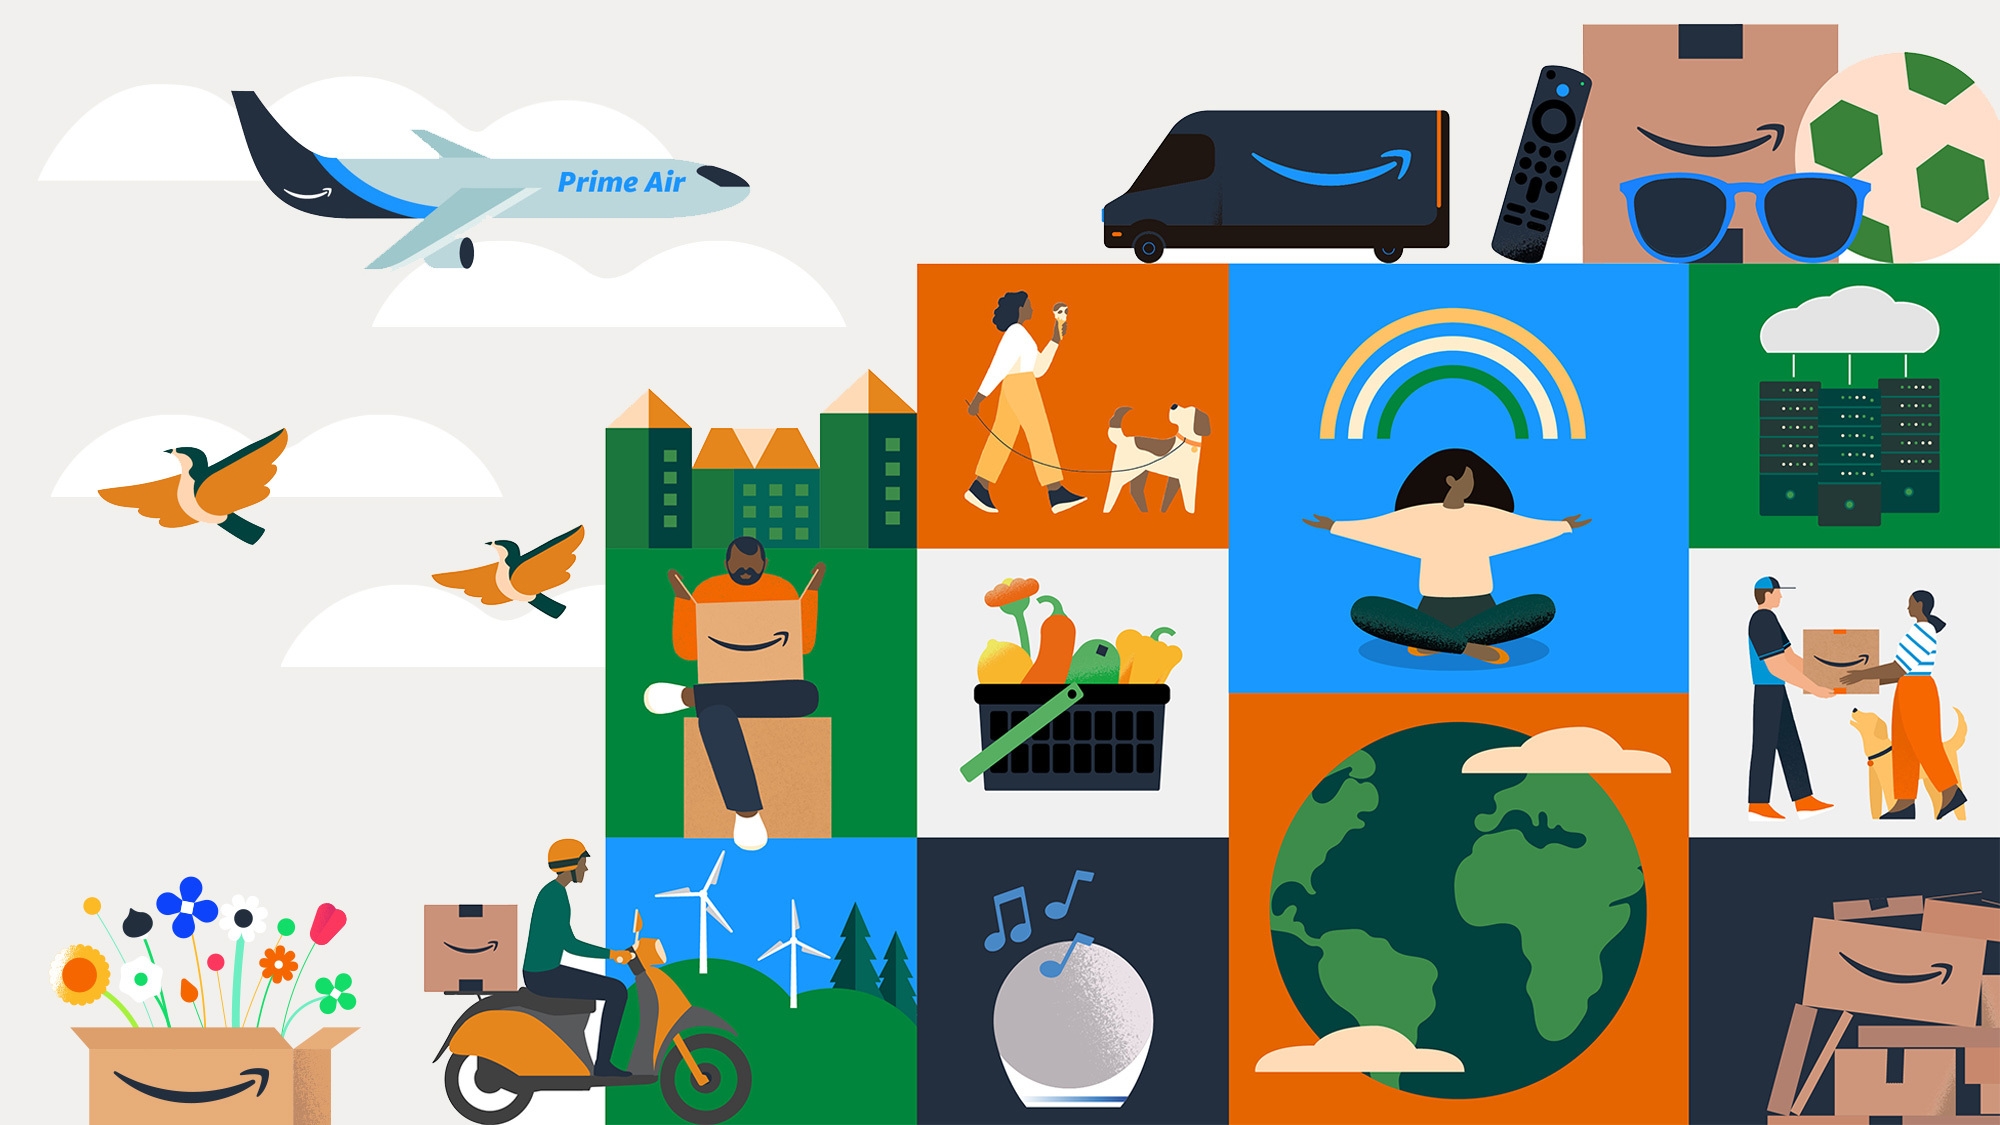 An collage of illustrated images that represent Amazon's sustainability efforts. The collage shows people handling, delivering, and opening boxes with the Amazon logo, assorted images, and the top left corner shows a plane with "Prime Air" written on it. 